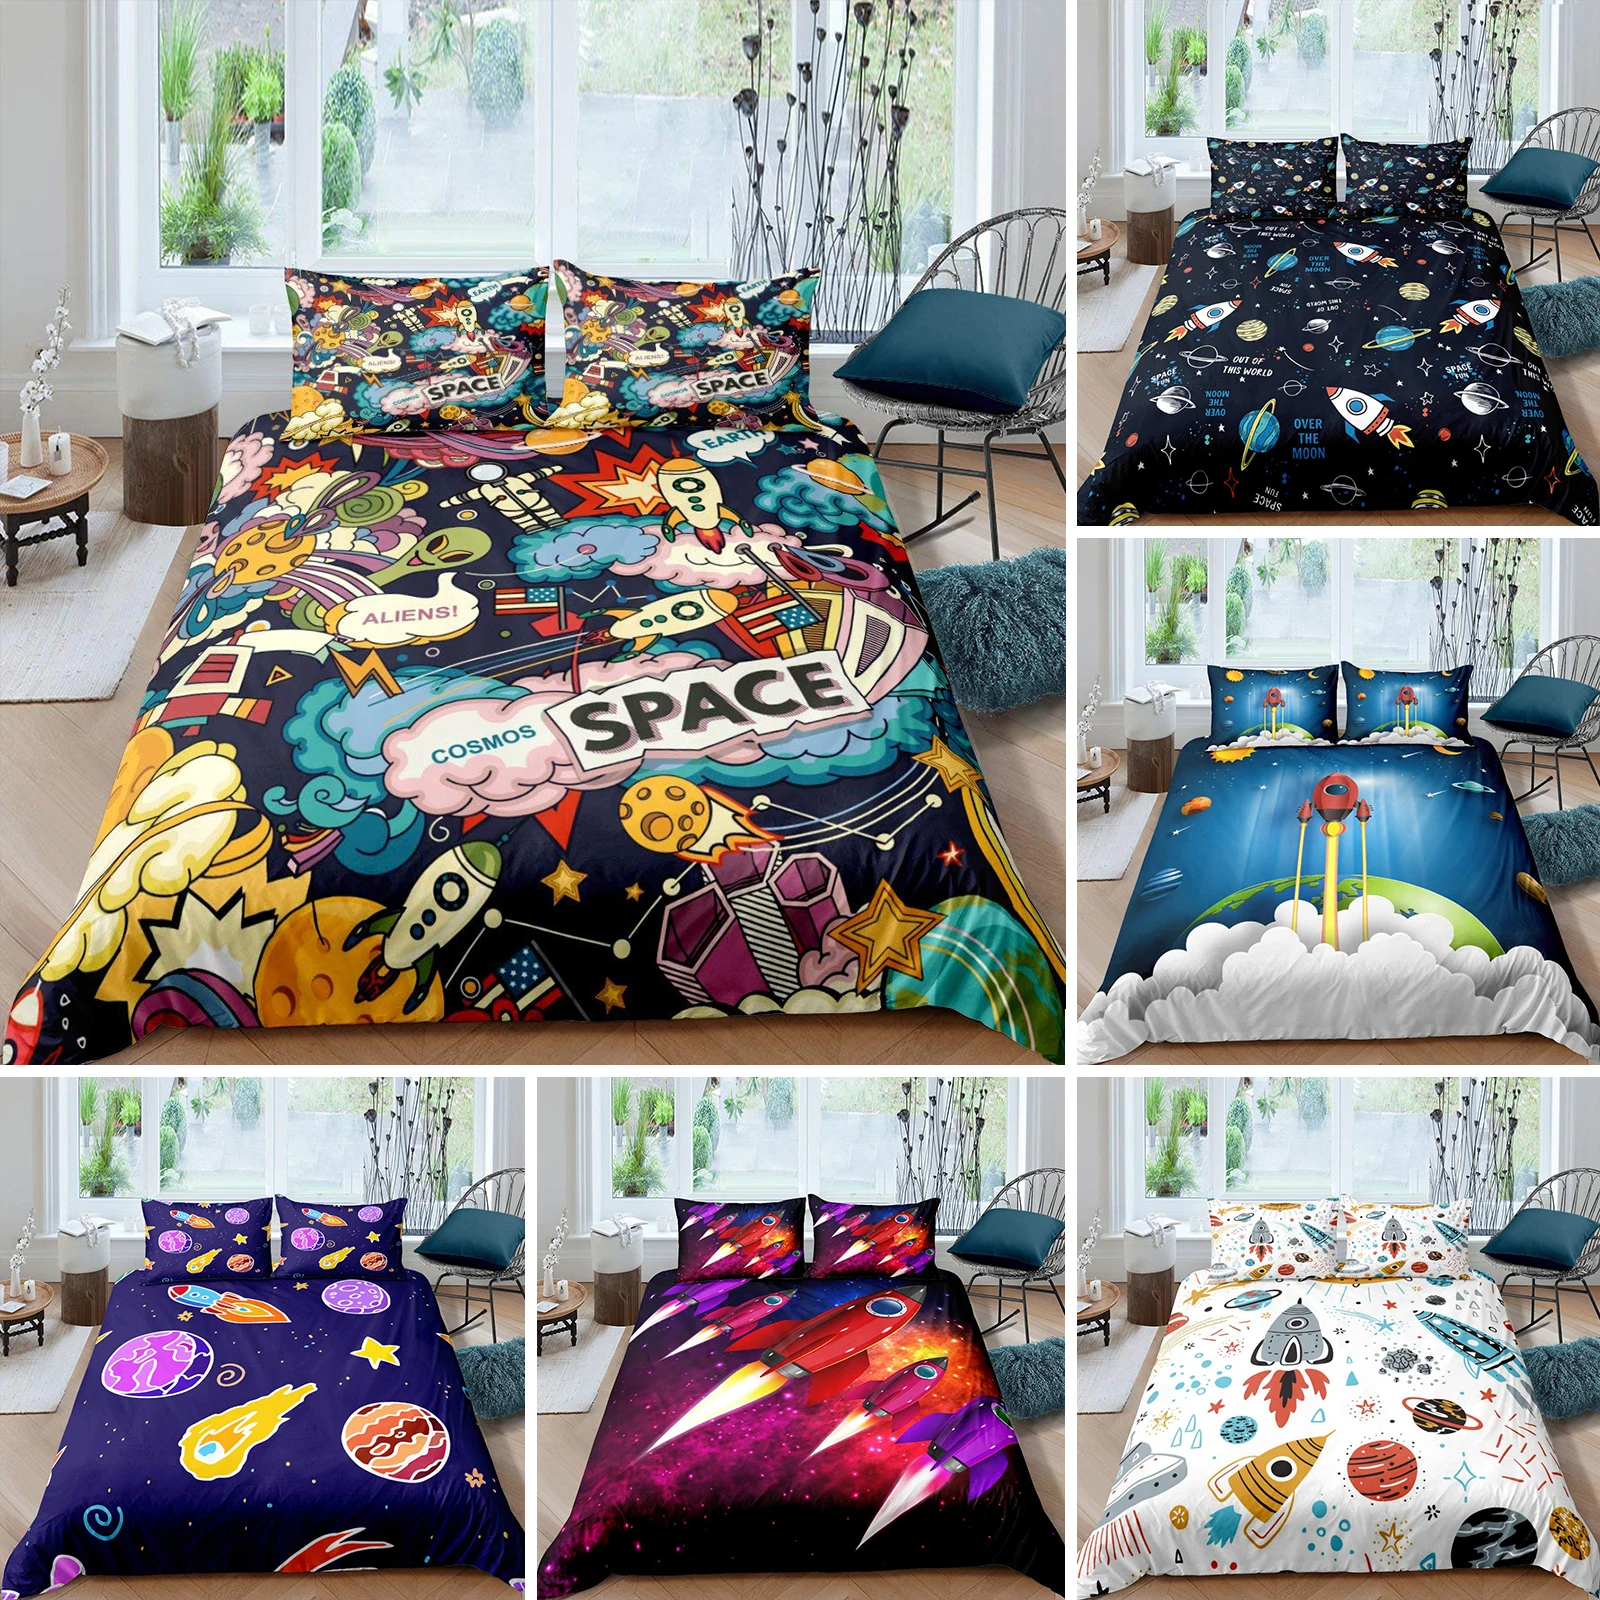 

Rocket Duvet Cover Set King Size Spaceship Bedding Set Twin Microfiber Outer Space Galaxy Stars Planet Cartoon Style Quilt Cover